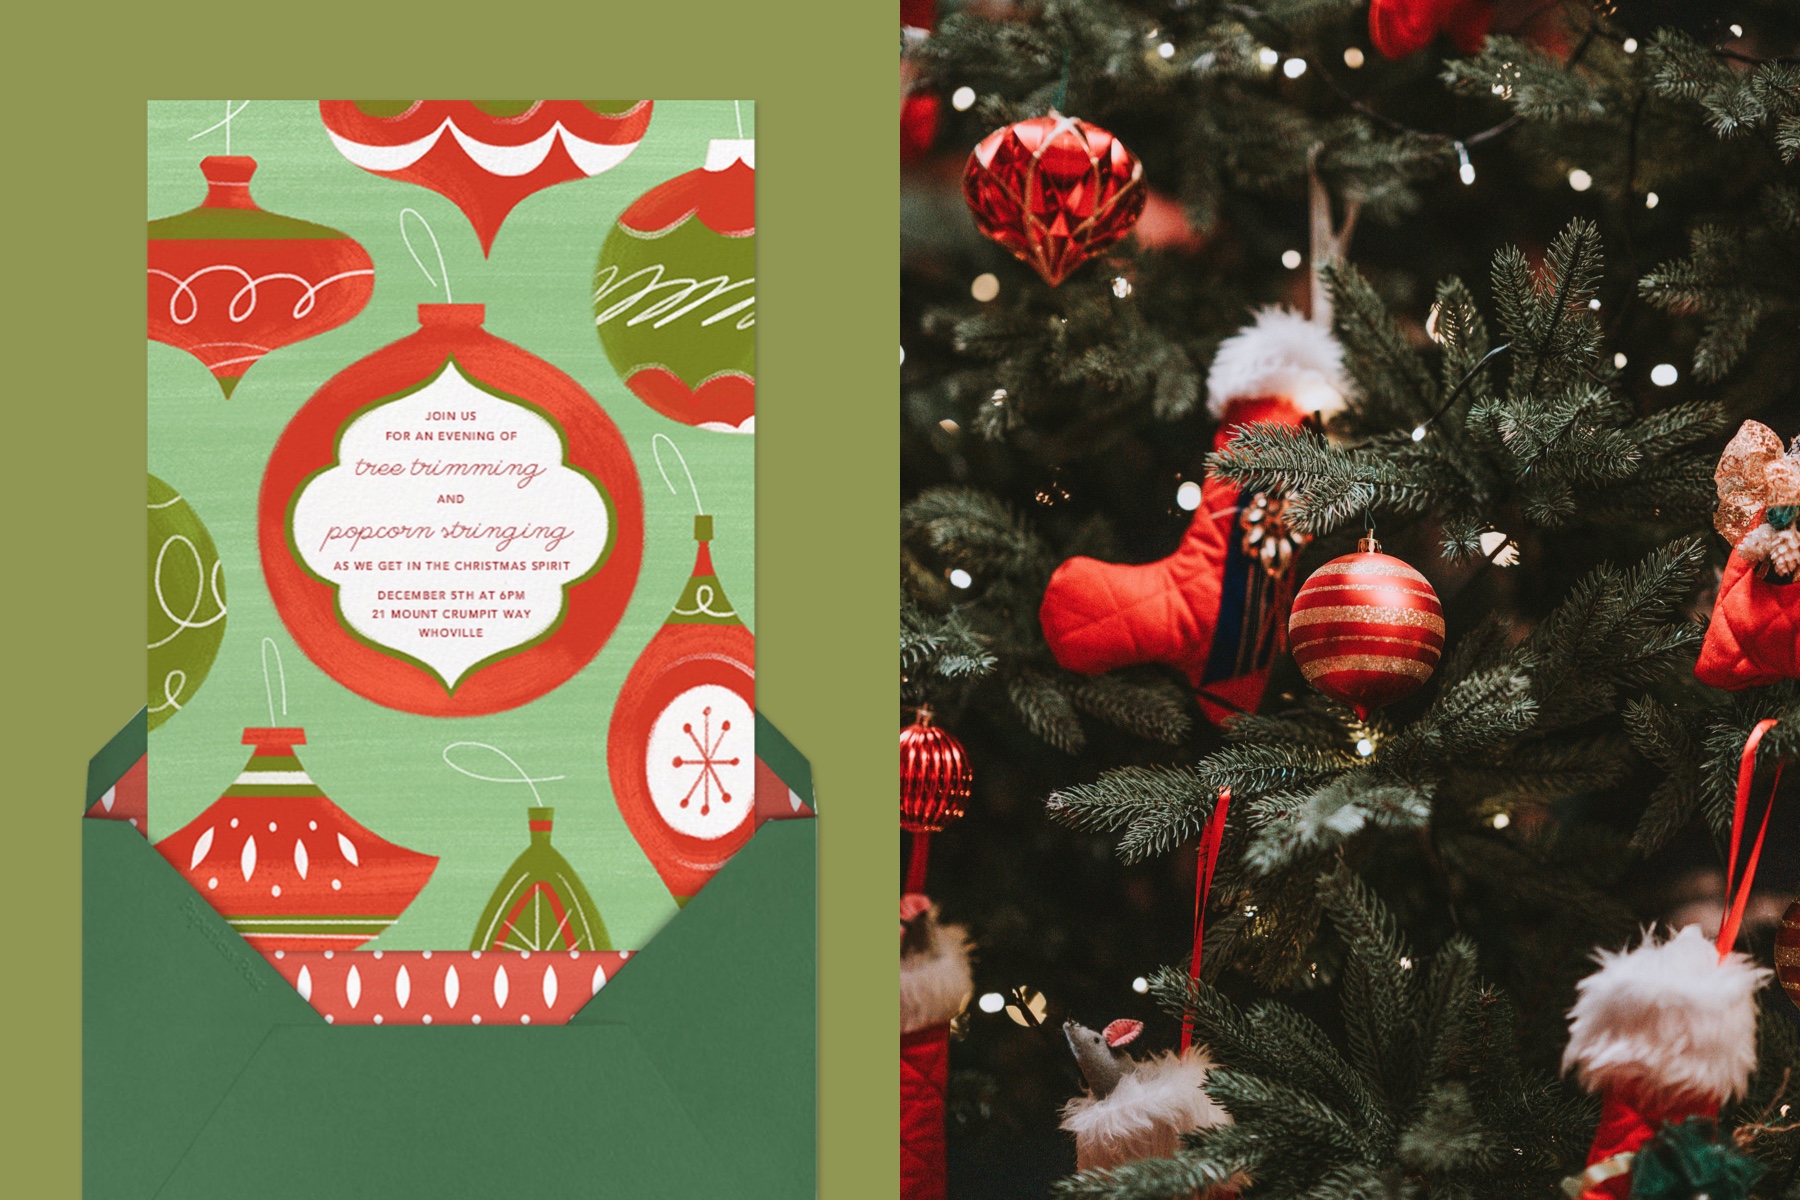 Left: A red and green holiday party invitation with Christmas tree ornaments. Right: Red ornaments on a Christmas tree.